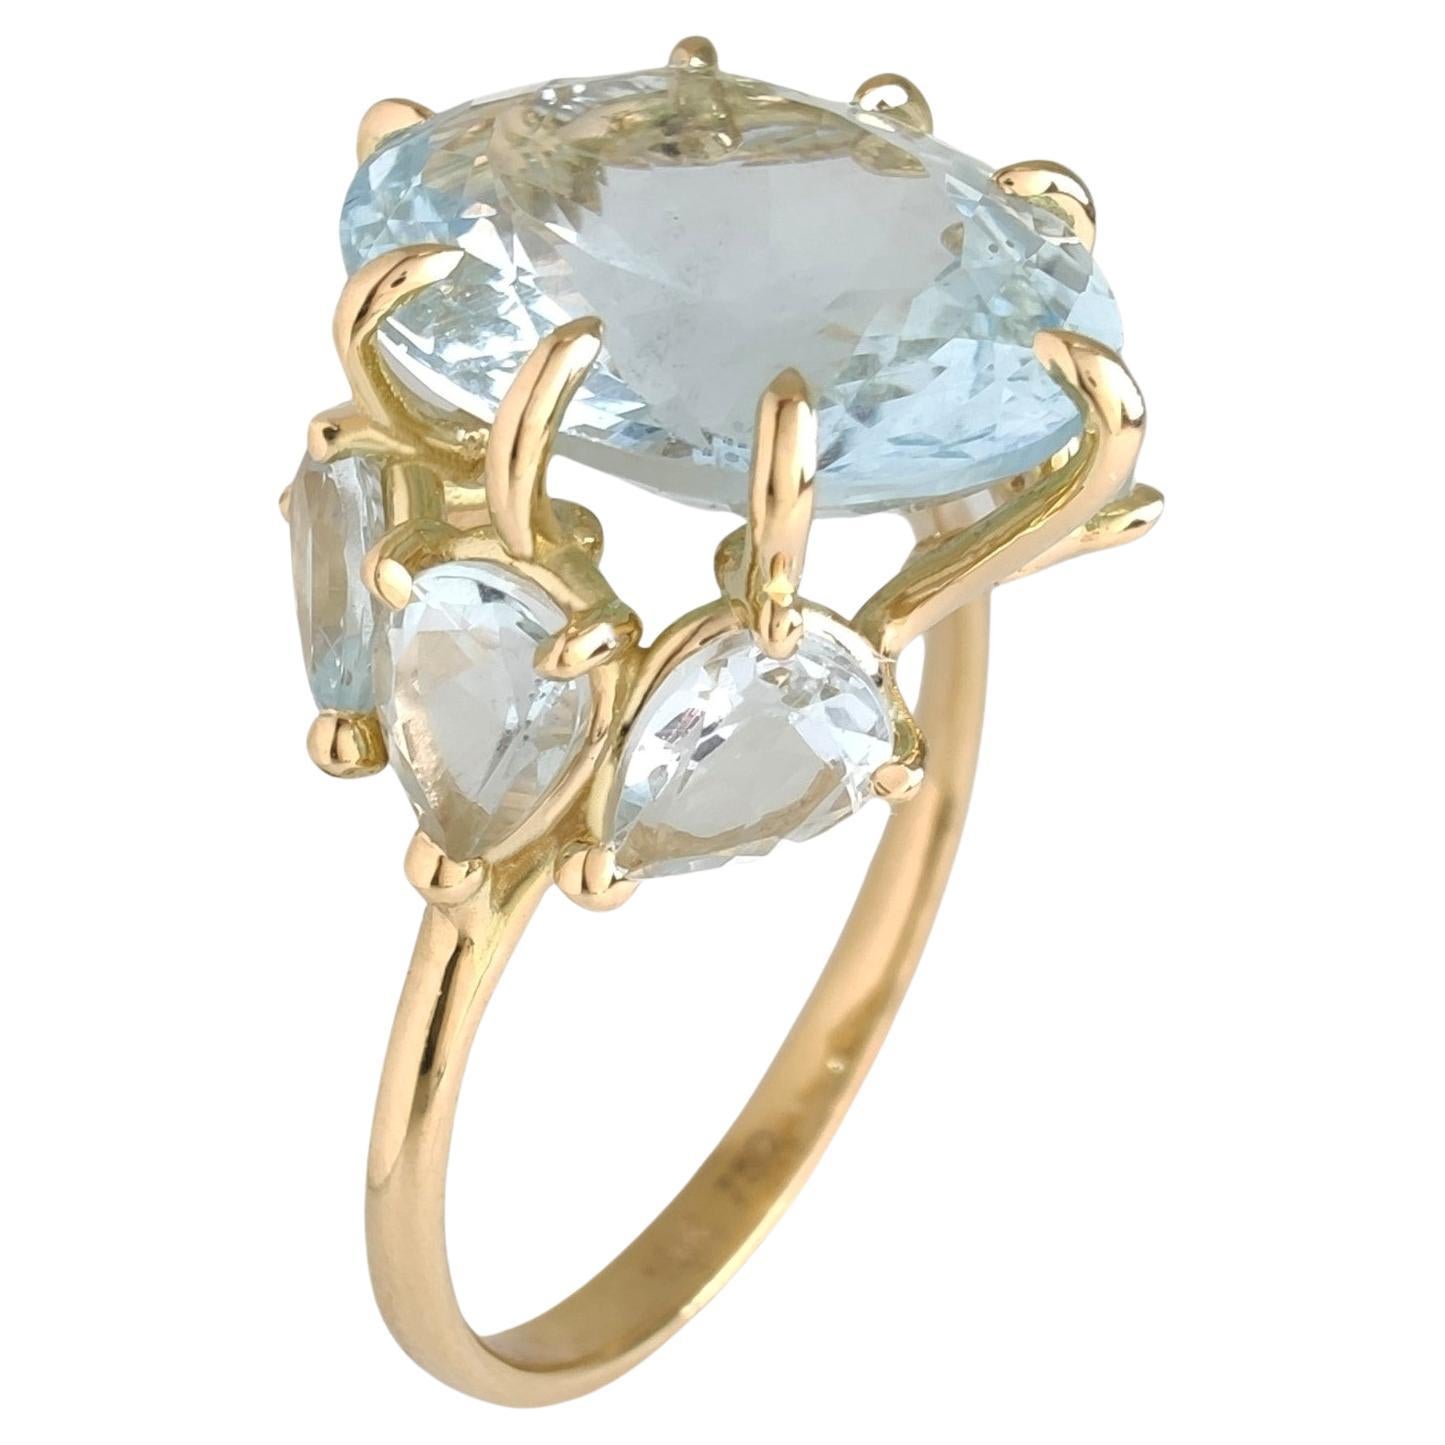 Handmade 4.8 Carat Oval Aquamarine Cocktail Ring in 18K Yellow Gold For Sale